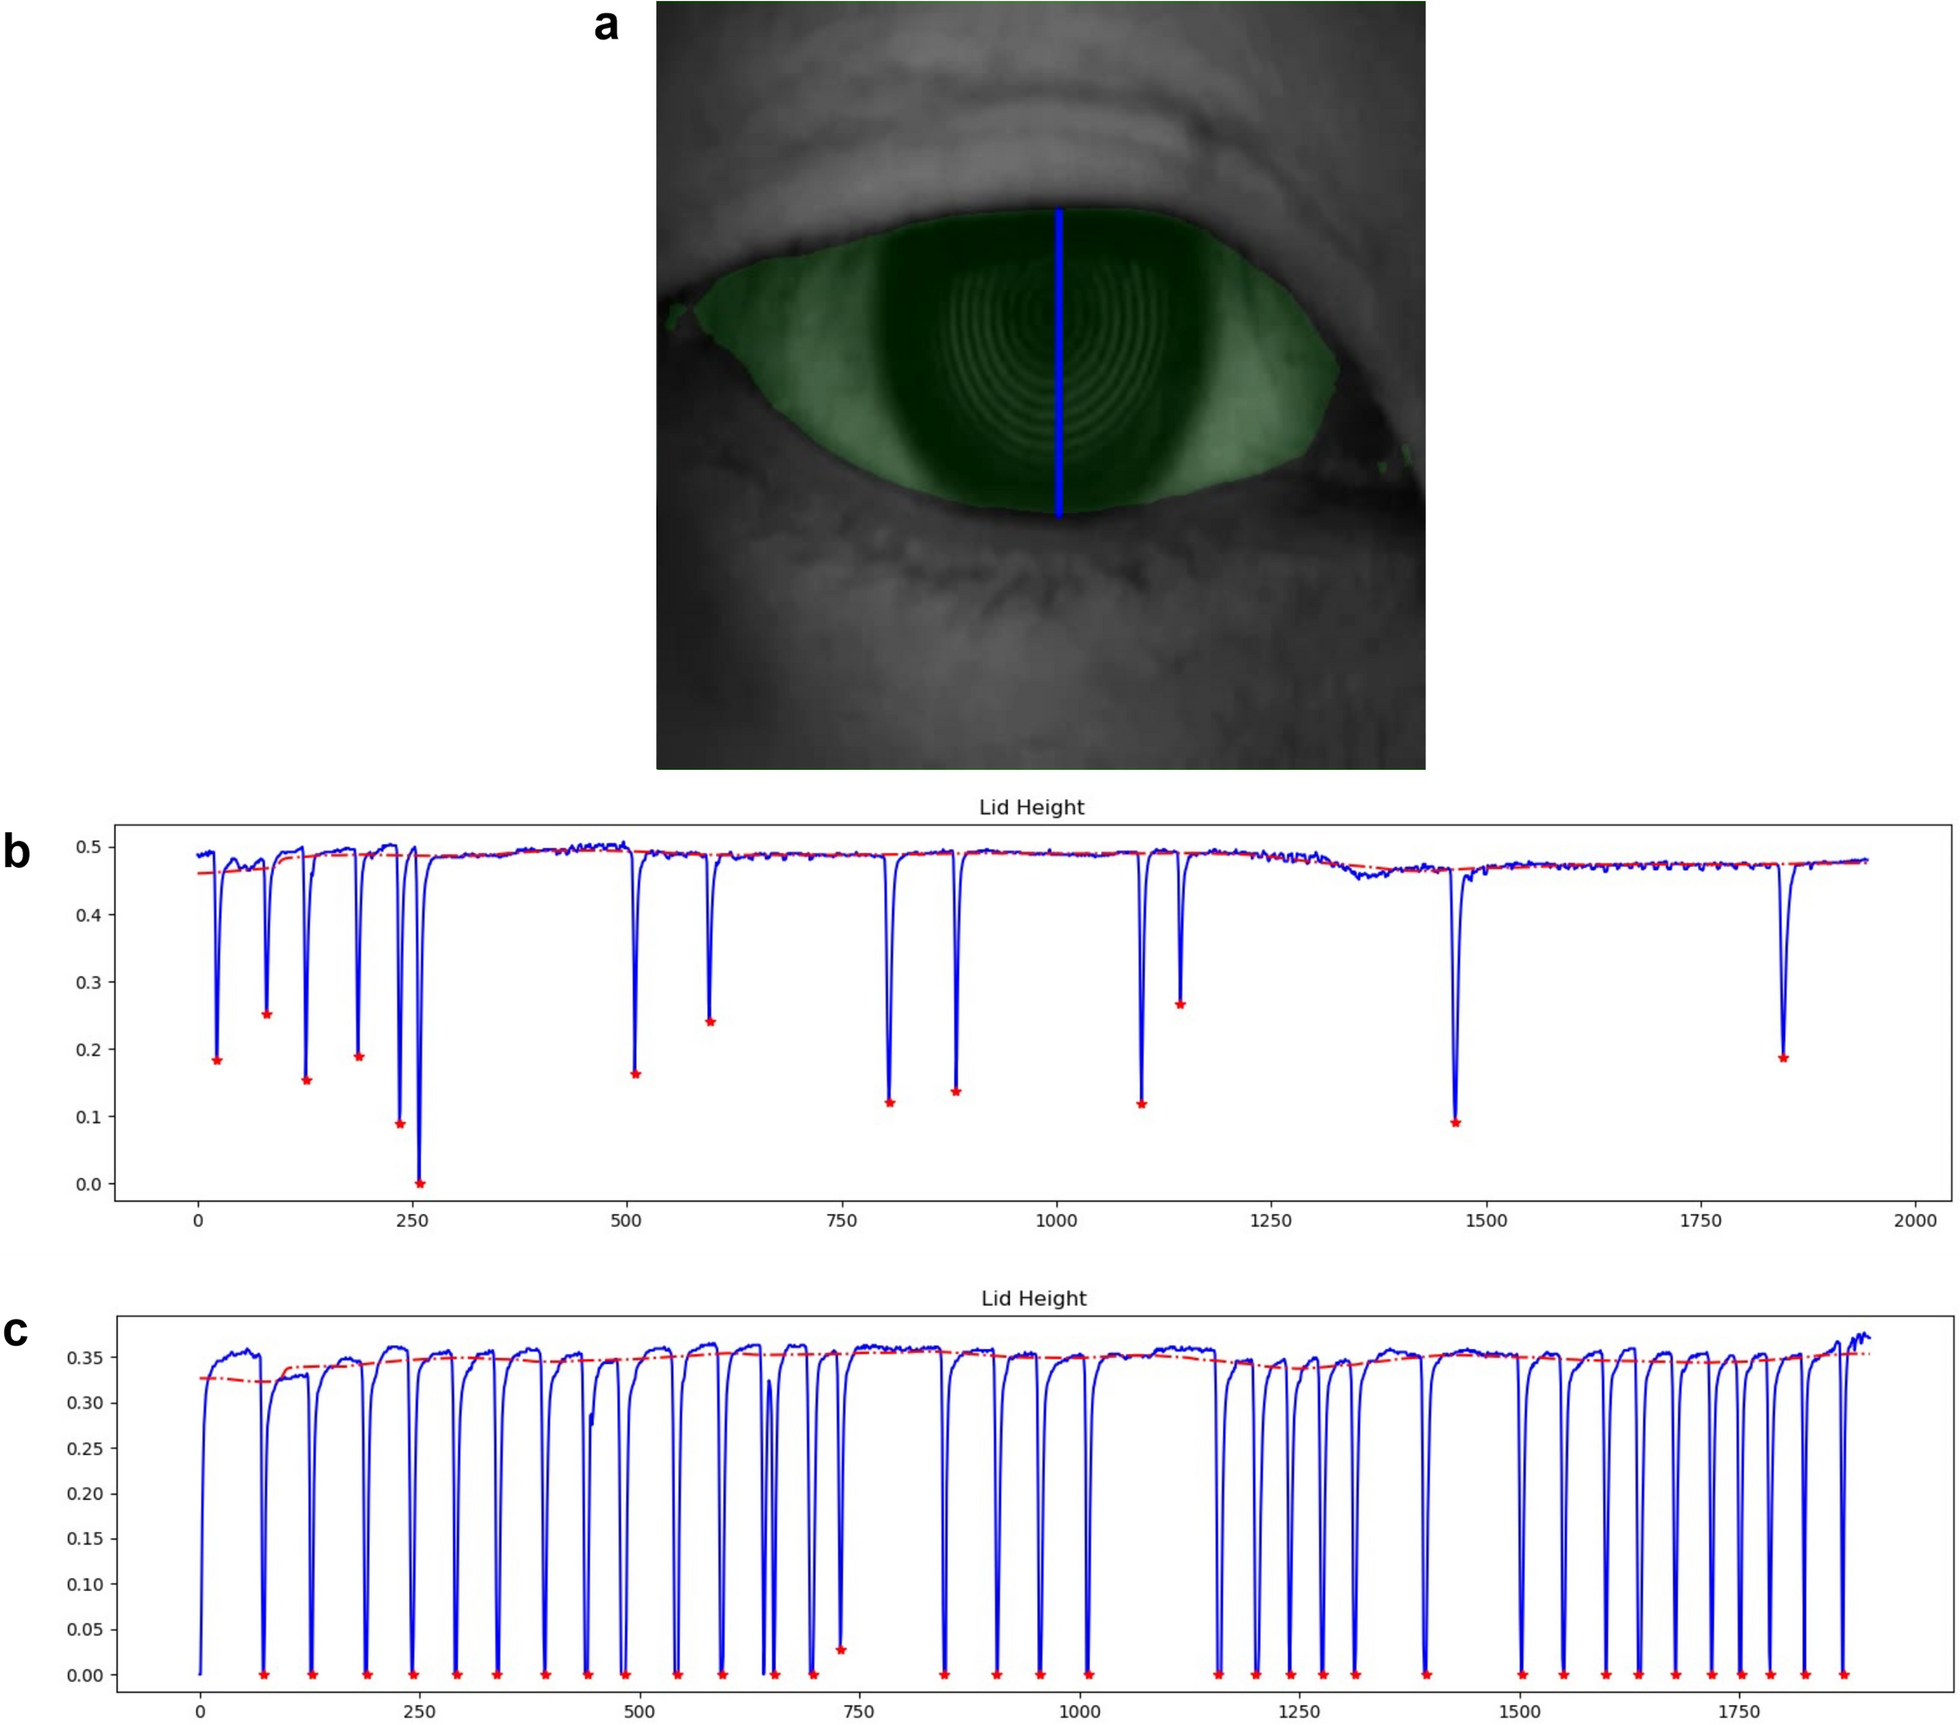 Comparison of deep learning-assisted blinking analysis system and Lipiview interferometer in dry eye patients: a cross-sectional study